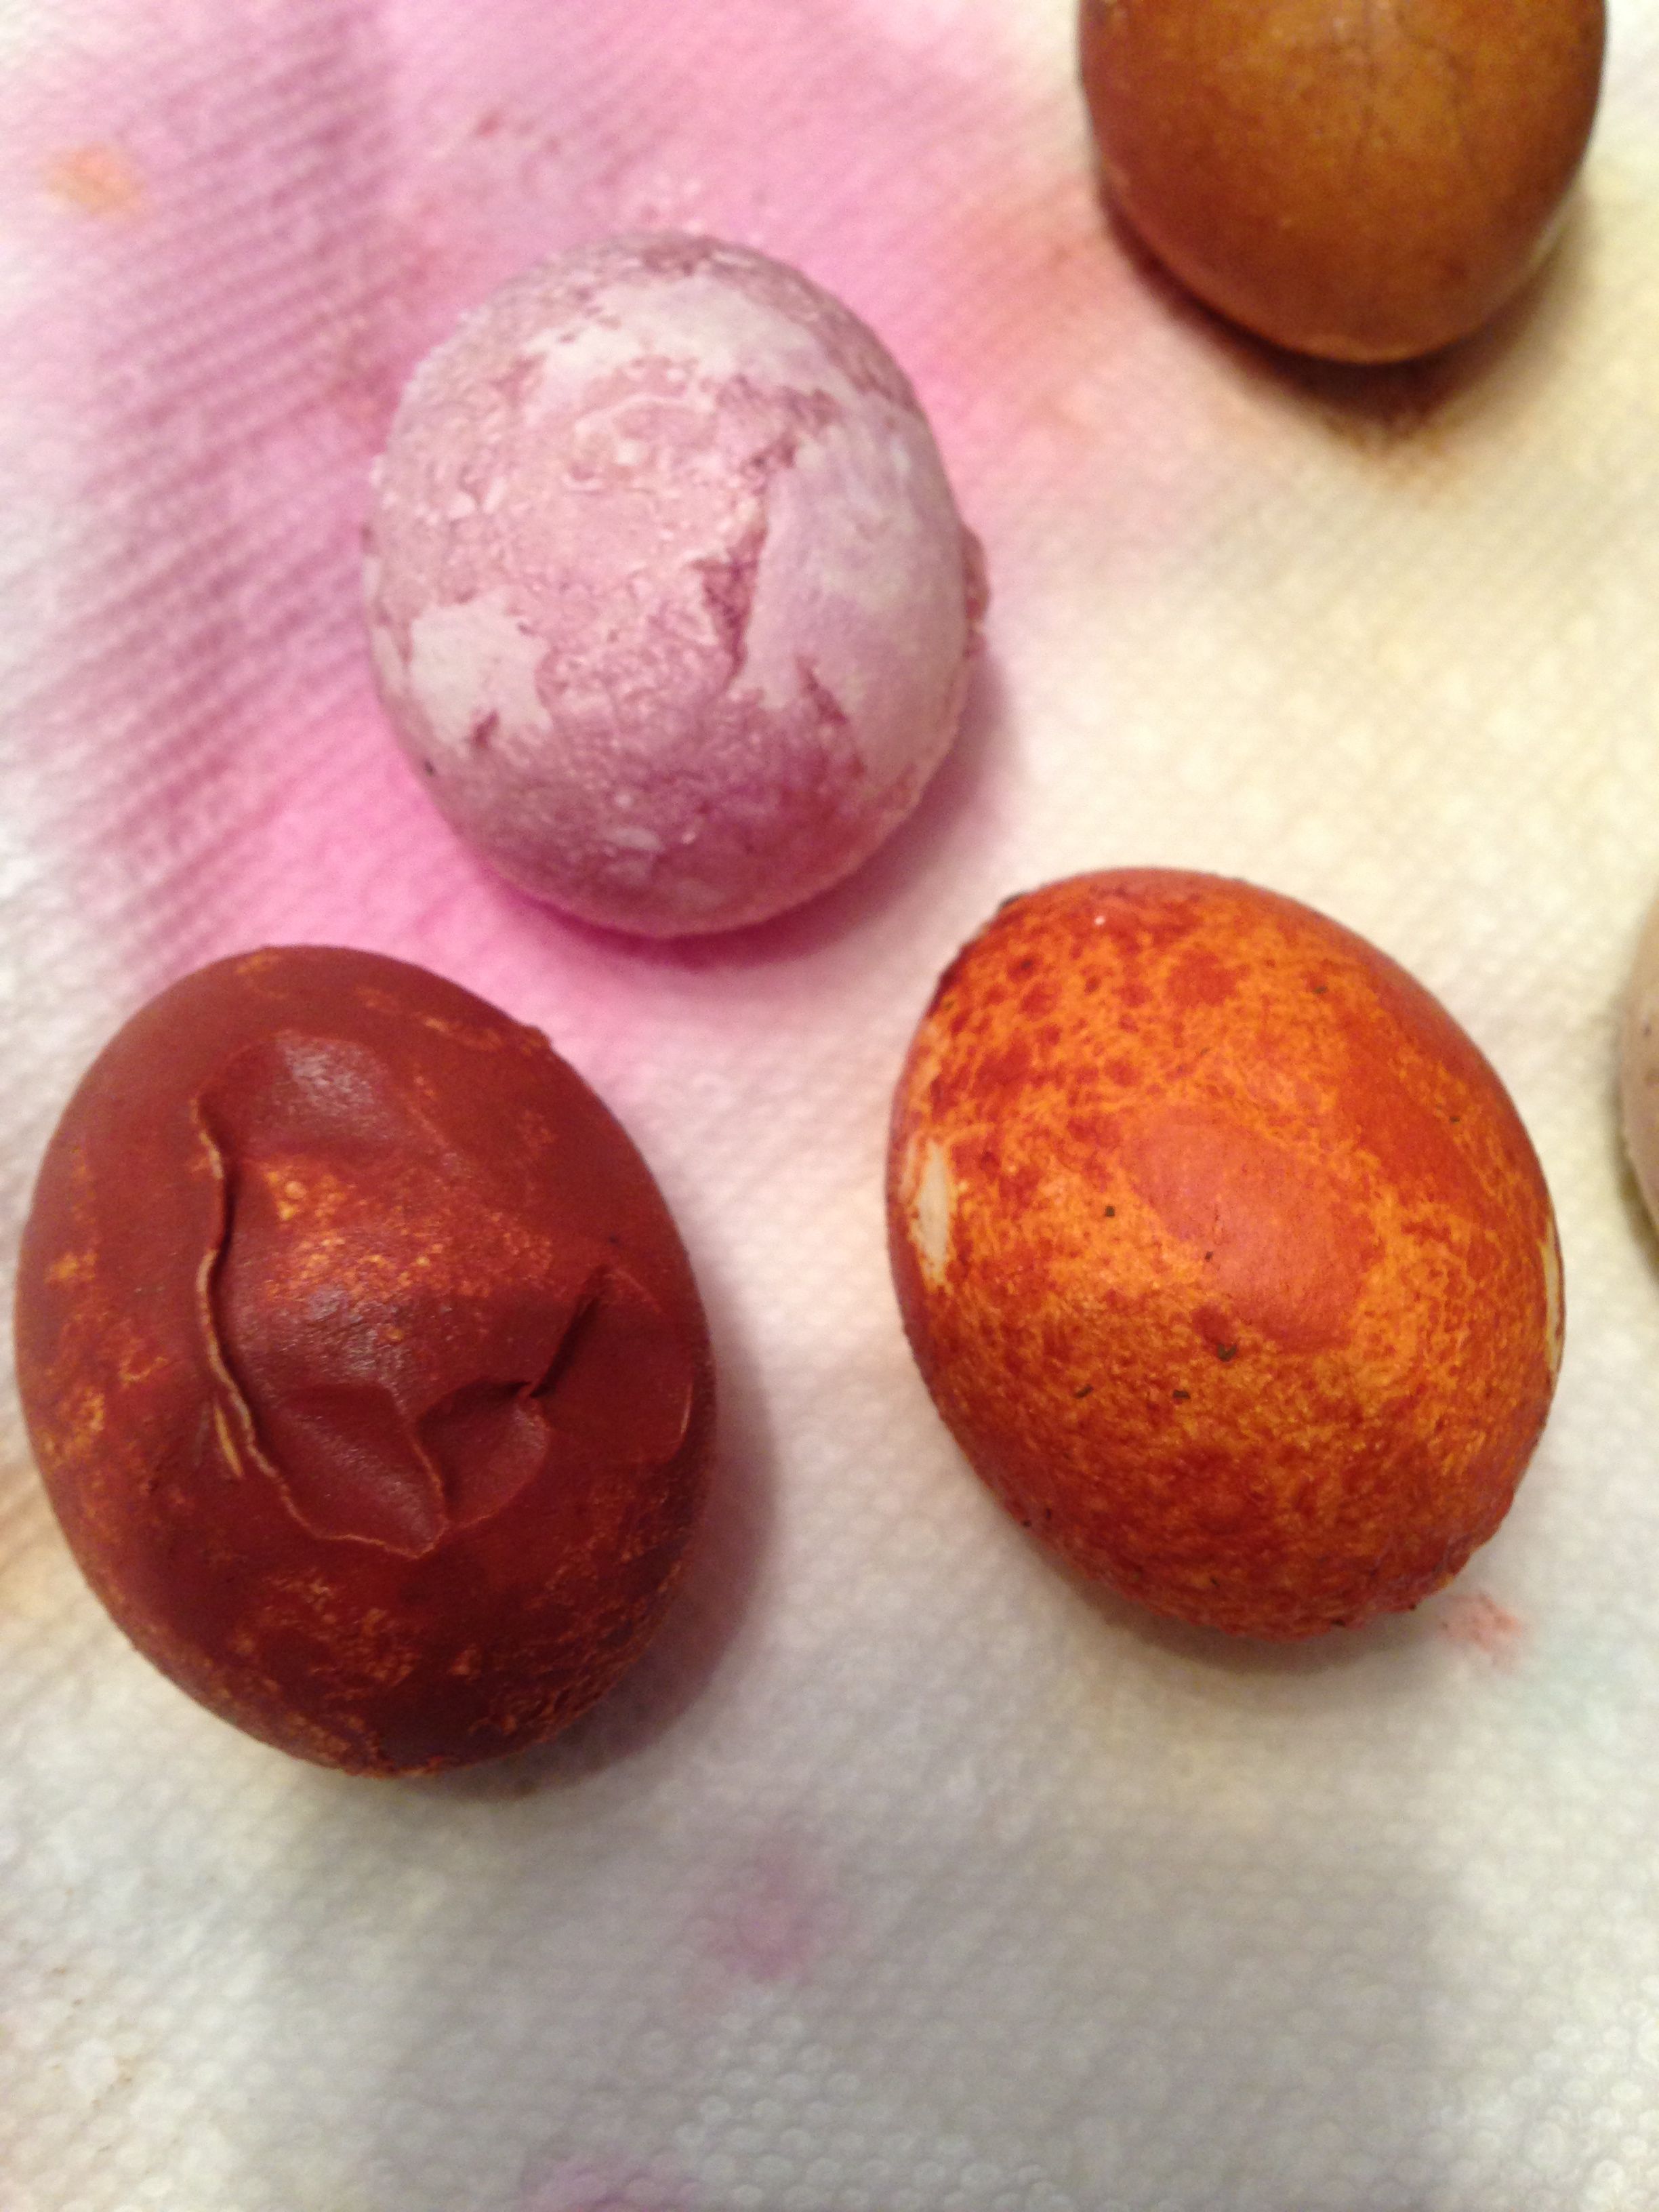 The 'rubber eggs.' Great color, but inedible. Note the dents on the egg at bottom left.